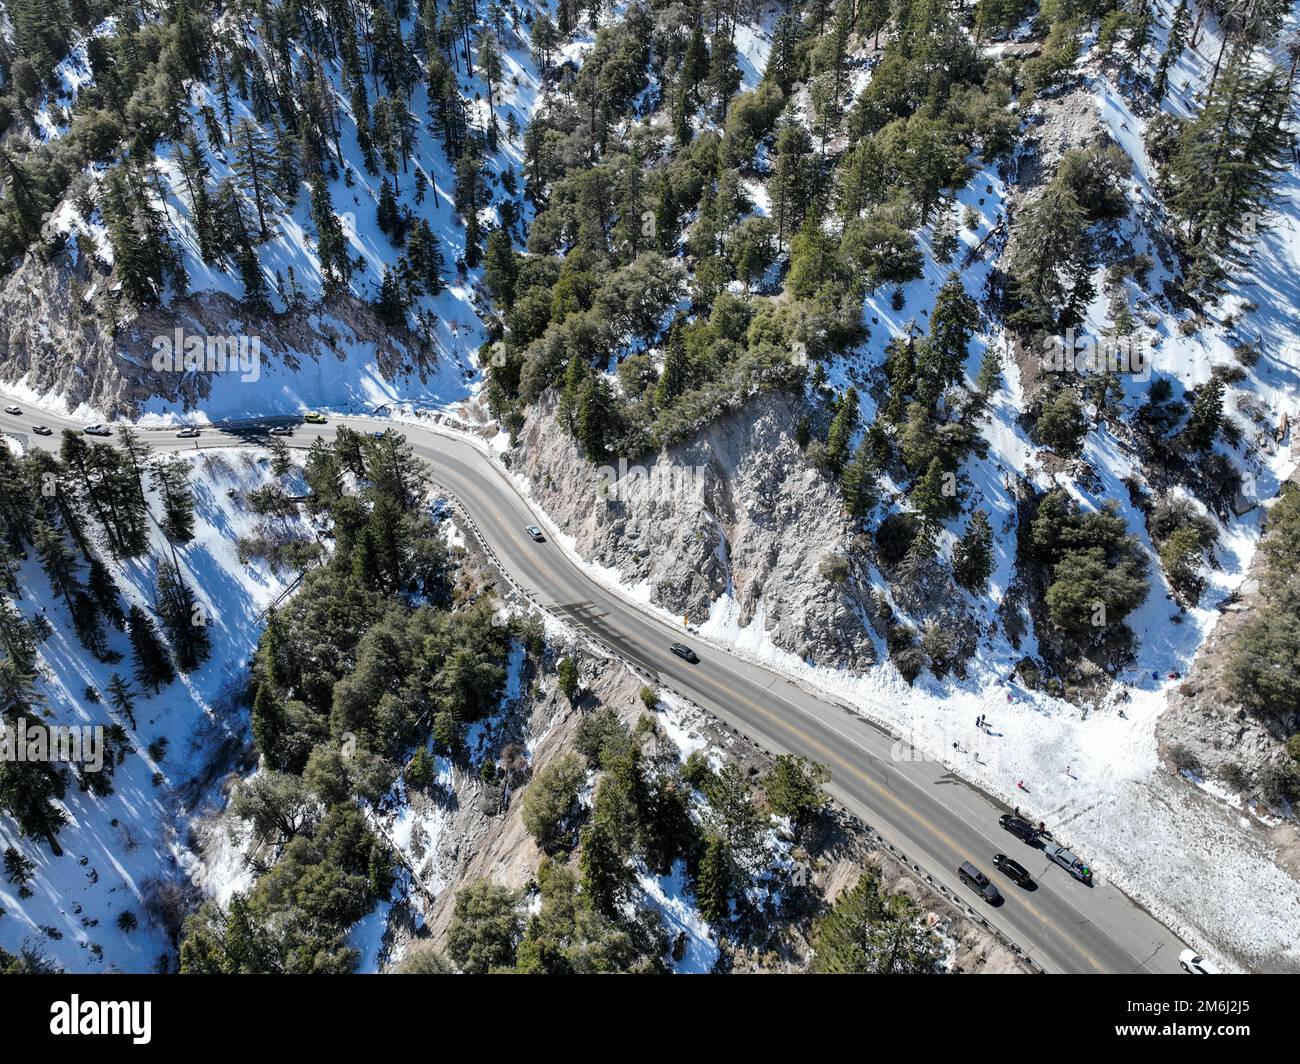 Aerial view of serpentine road in snow mountain in San Bernardino National Forest, Stock Photo